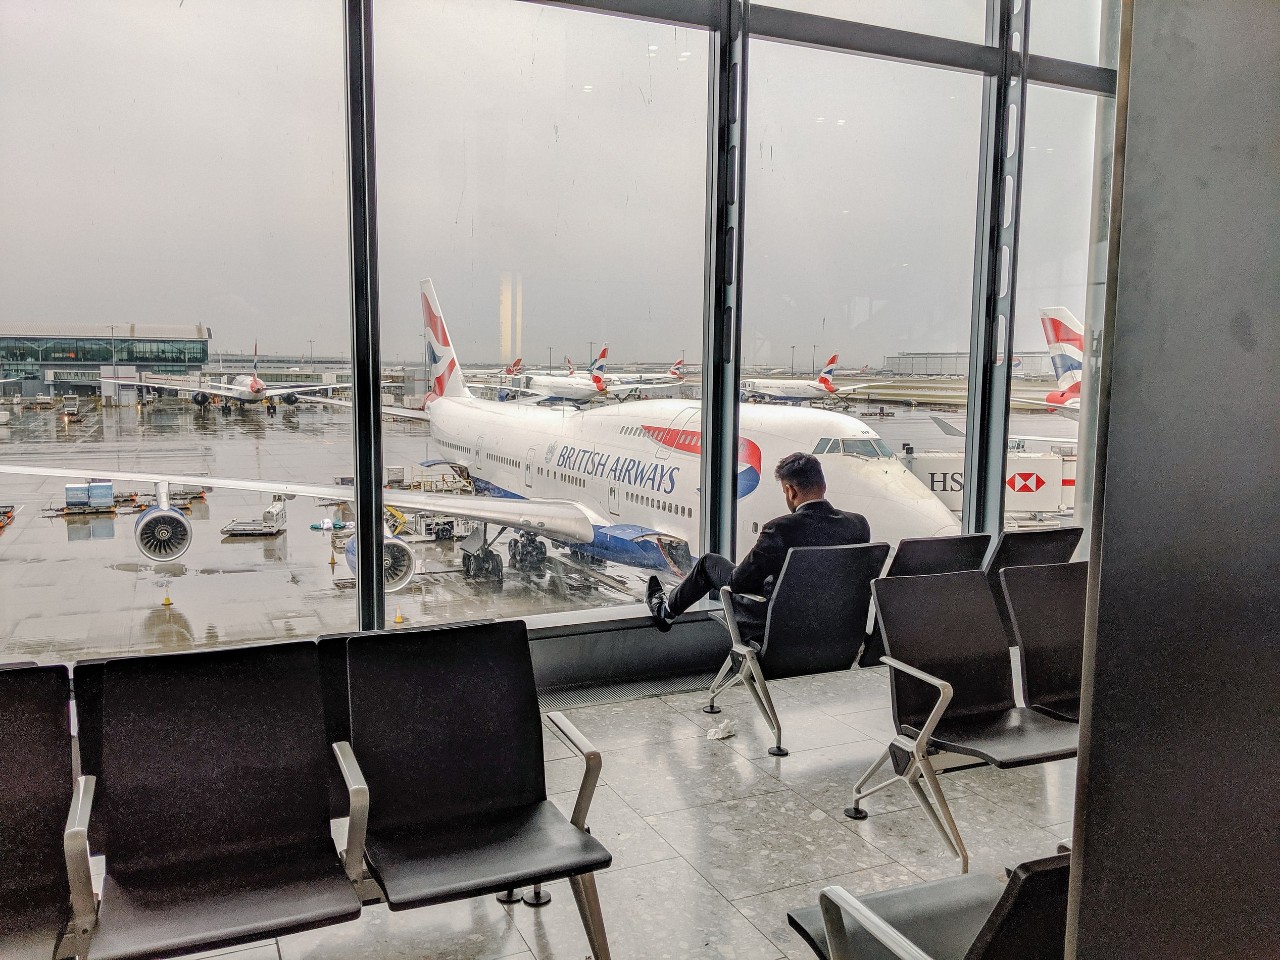 A man waits at an airport terminal overlooking an airliner.